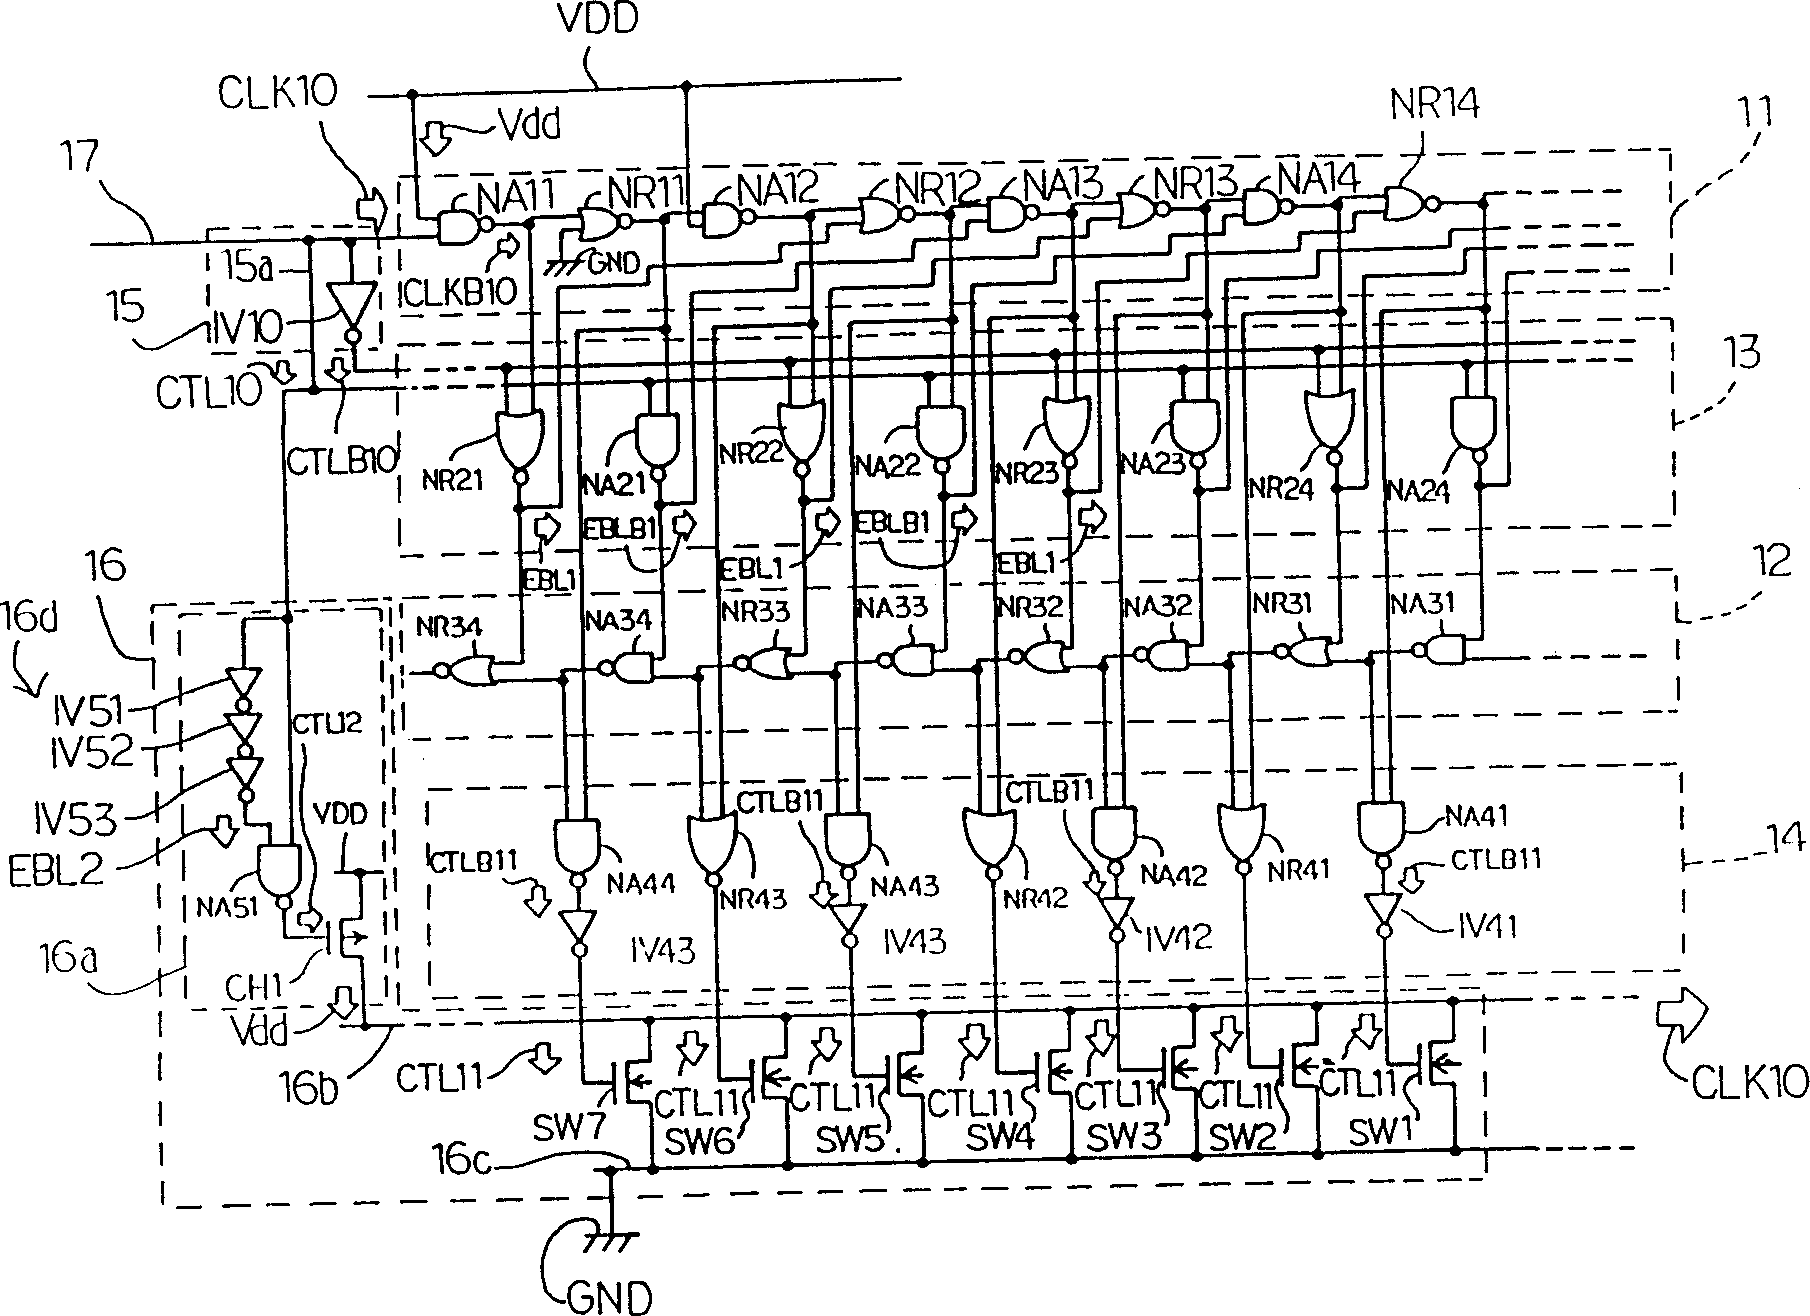 Clamp-like movement delayed circuit with output signal repeat sycle different from input signal